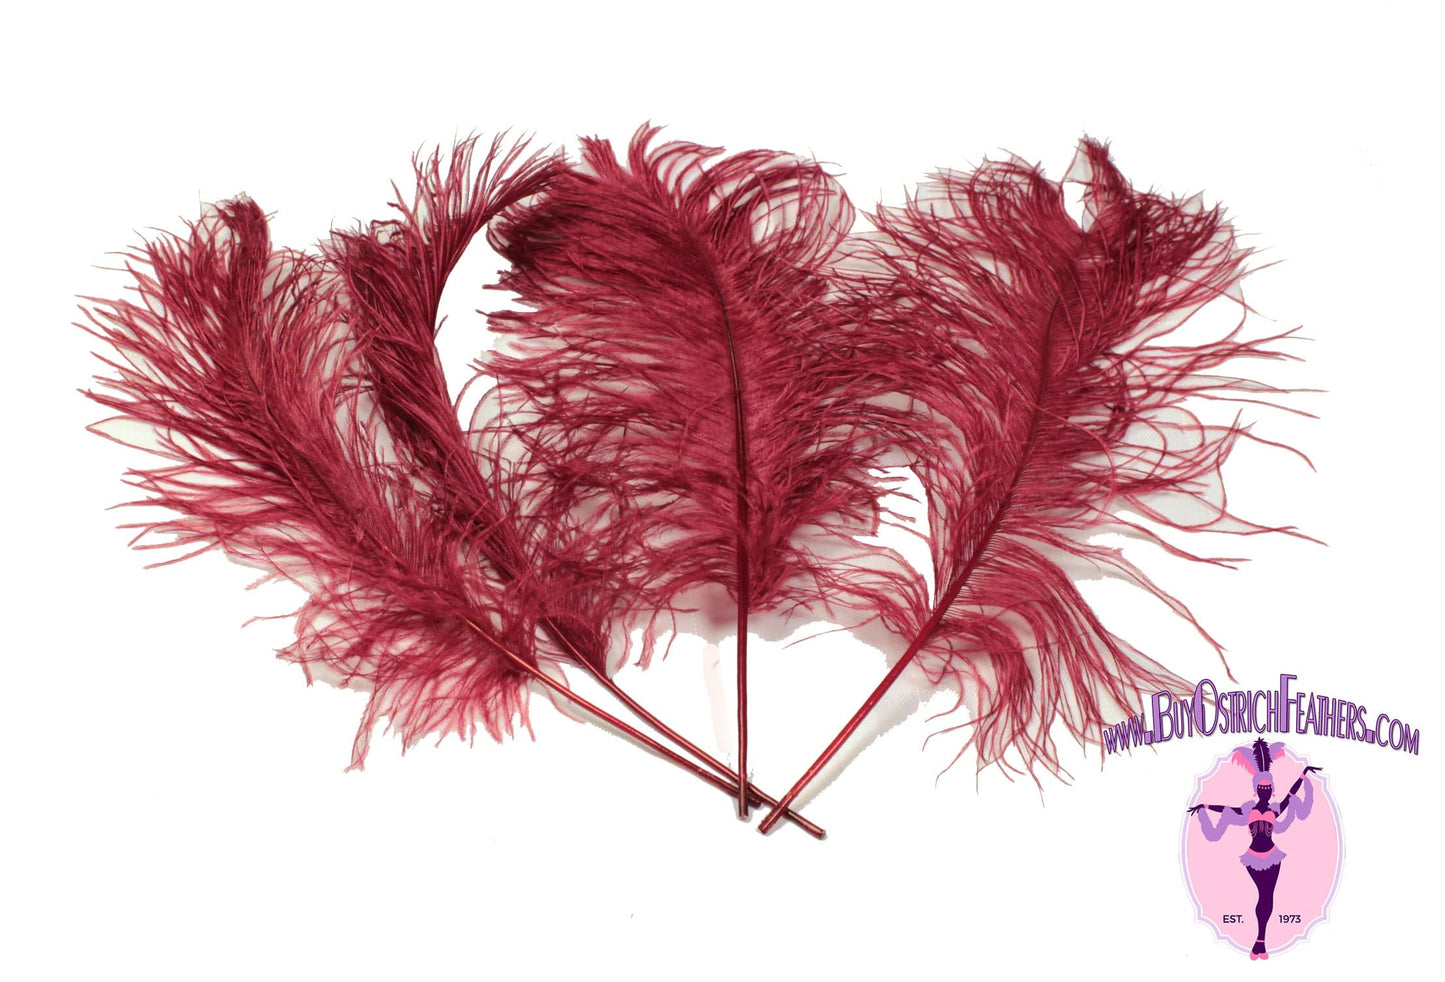 Ostrich Feather Tail Plumes 11-14" (Burgundy) - Buy Ostrich Feathers